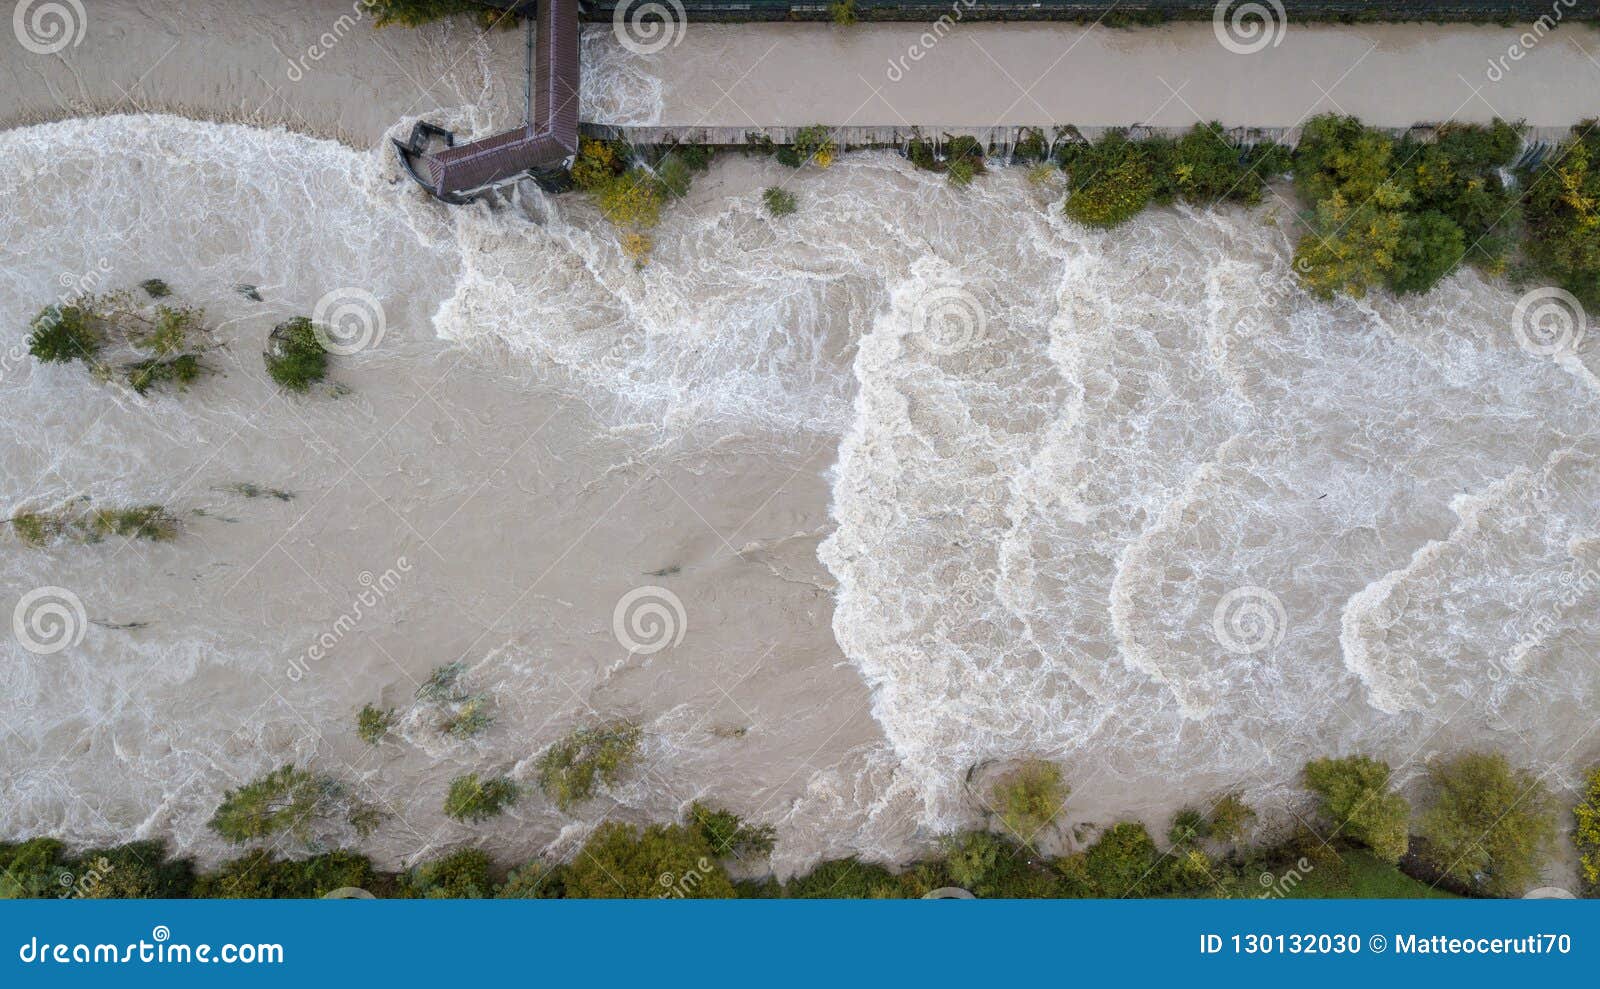 drone aerial view of the serio river swollen after heavy rains. province of bergamo, northern italy